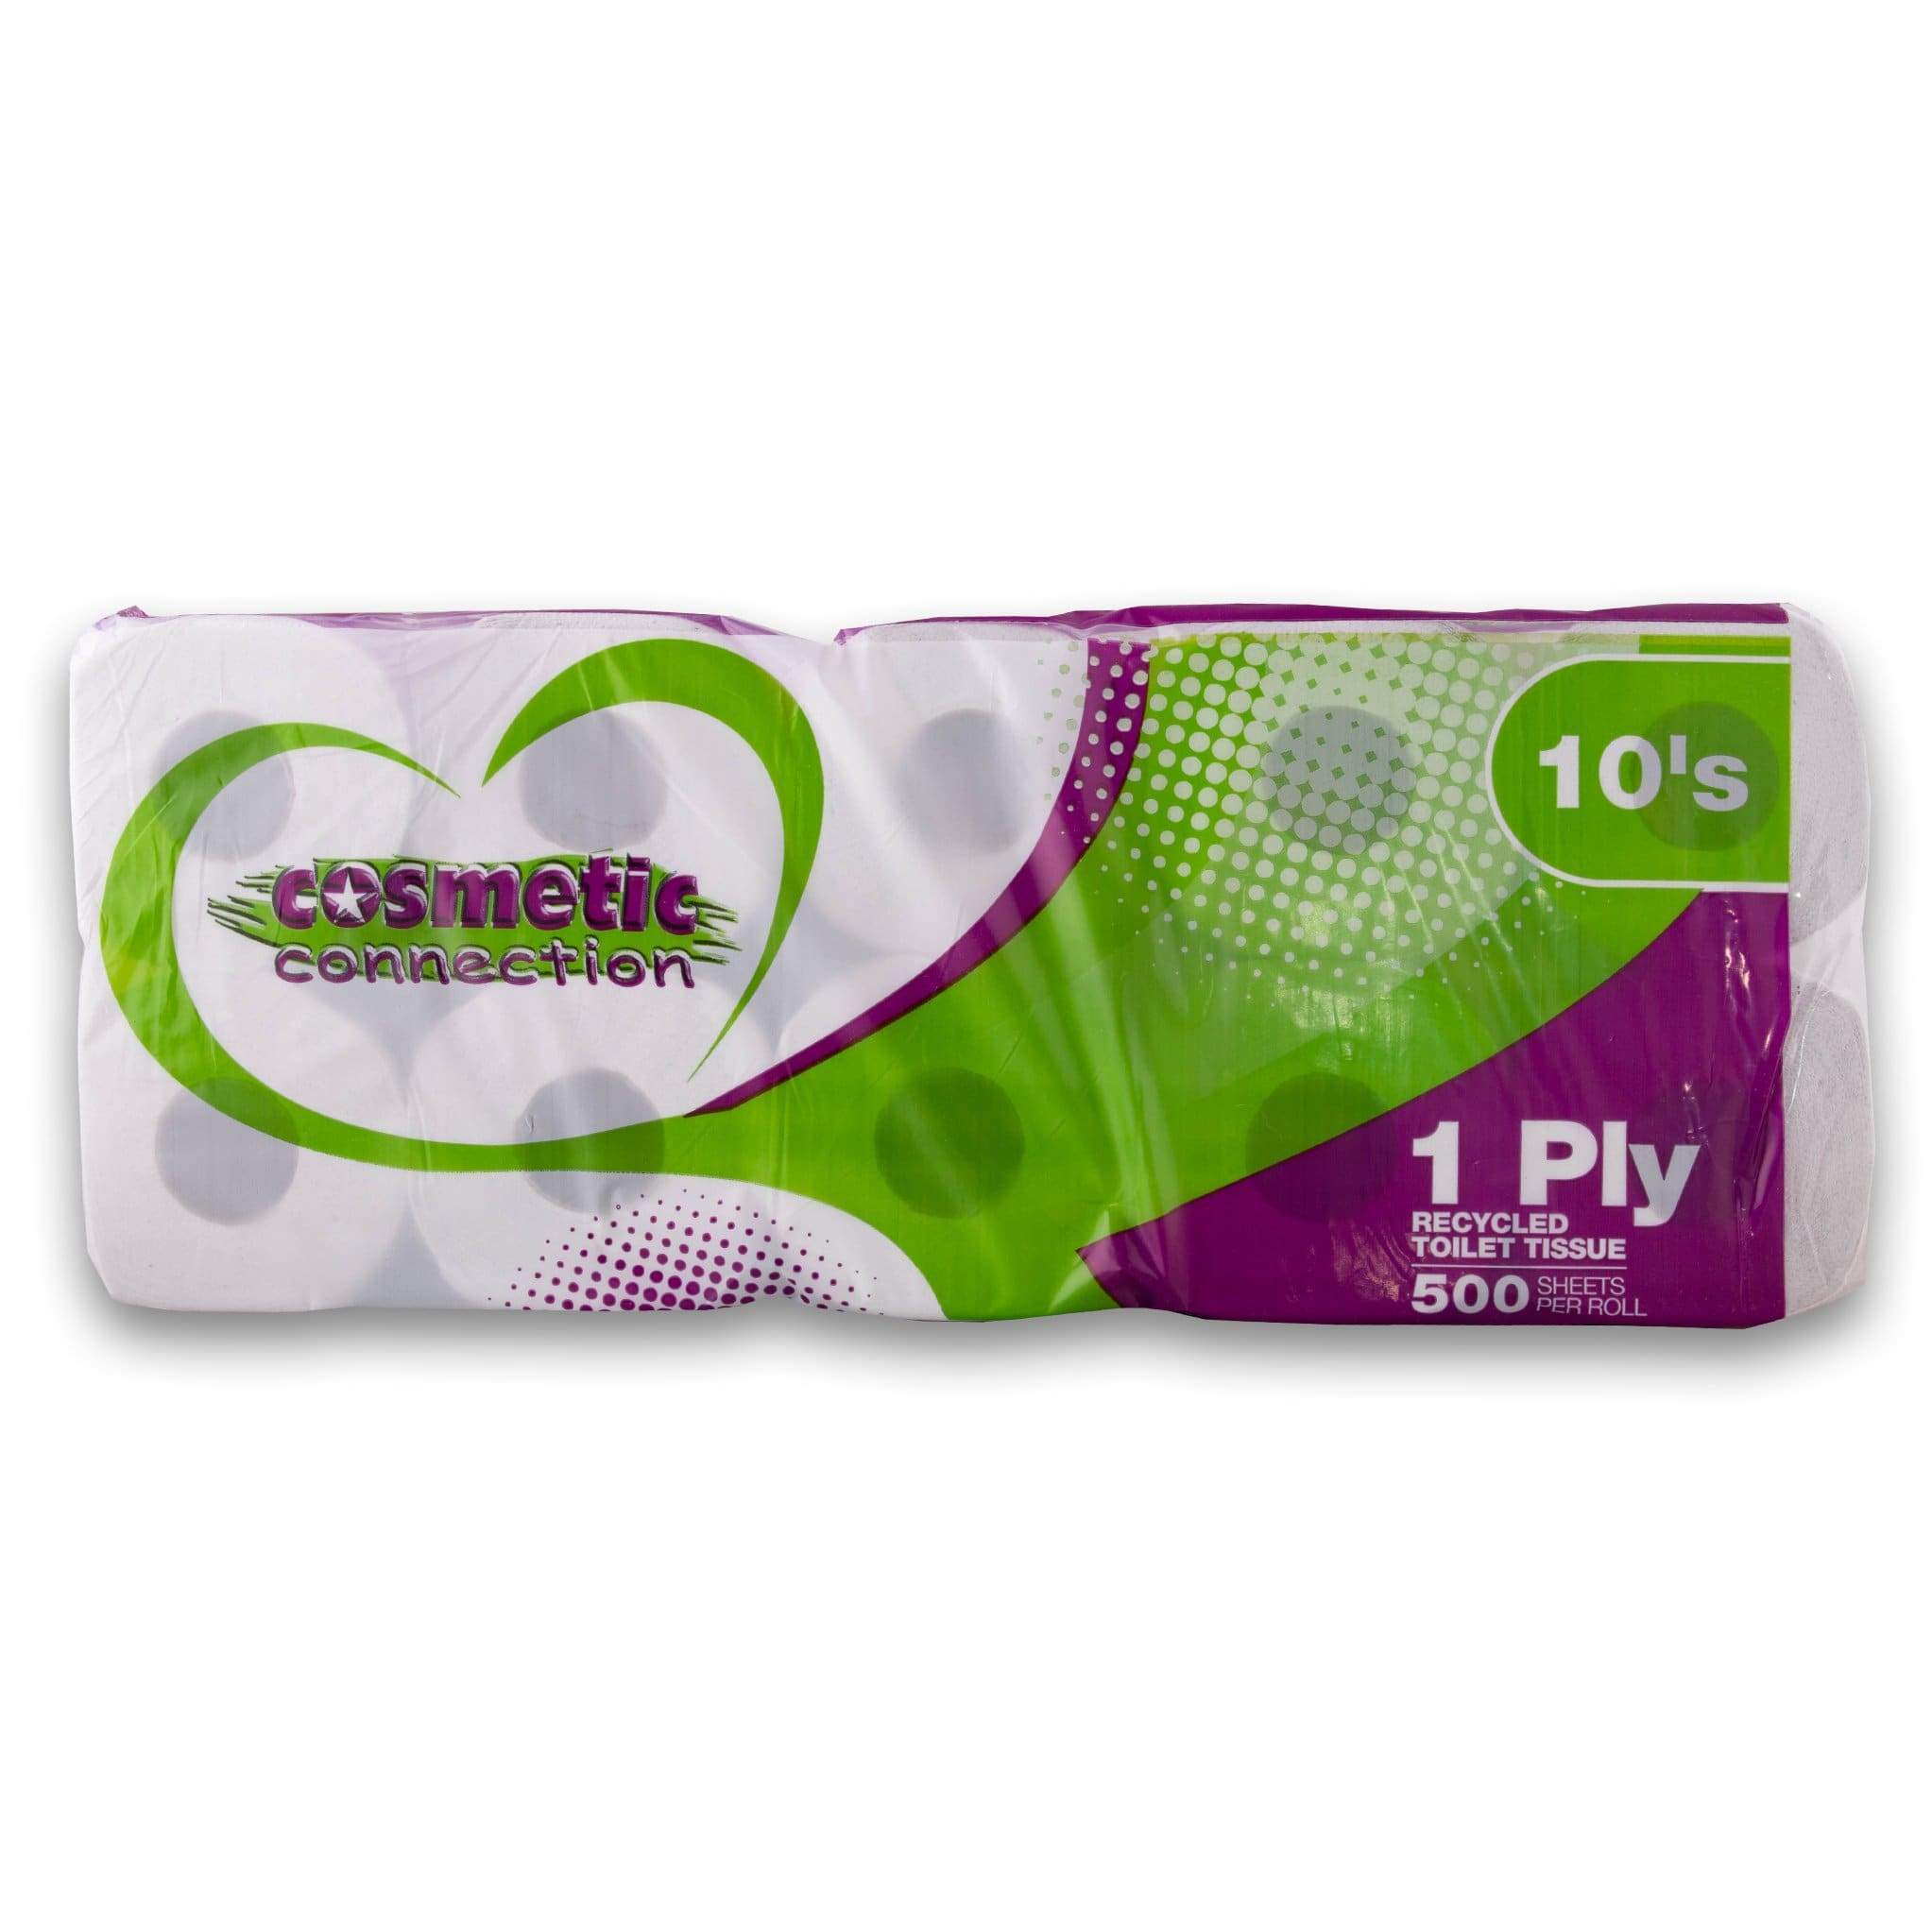 Cosmetic Connection, Toilet Paper 10's 1Ply - Cosmetic Connection